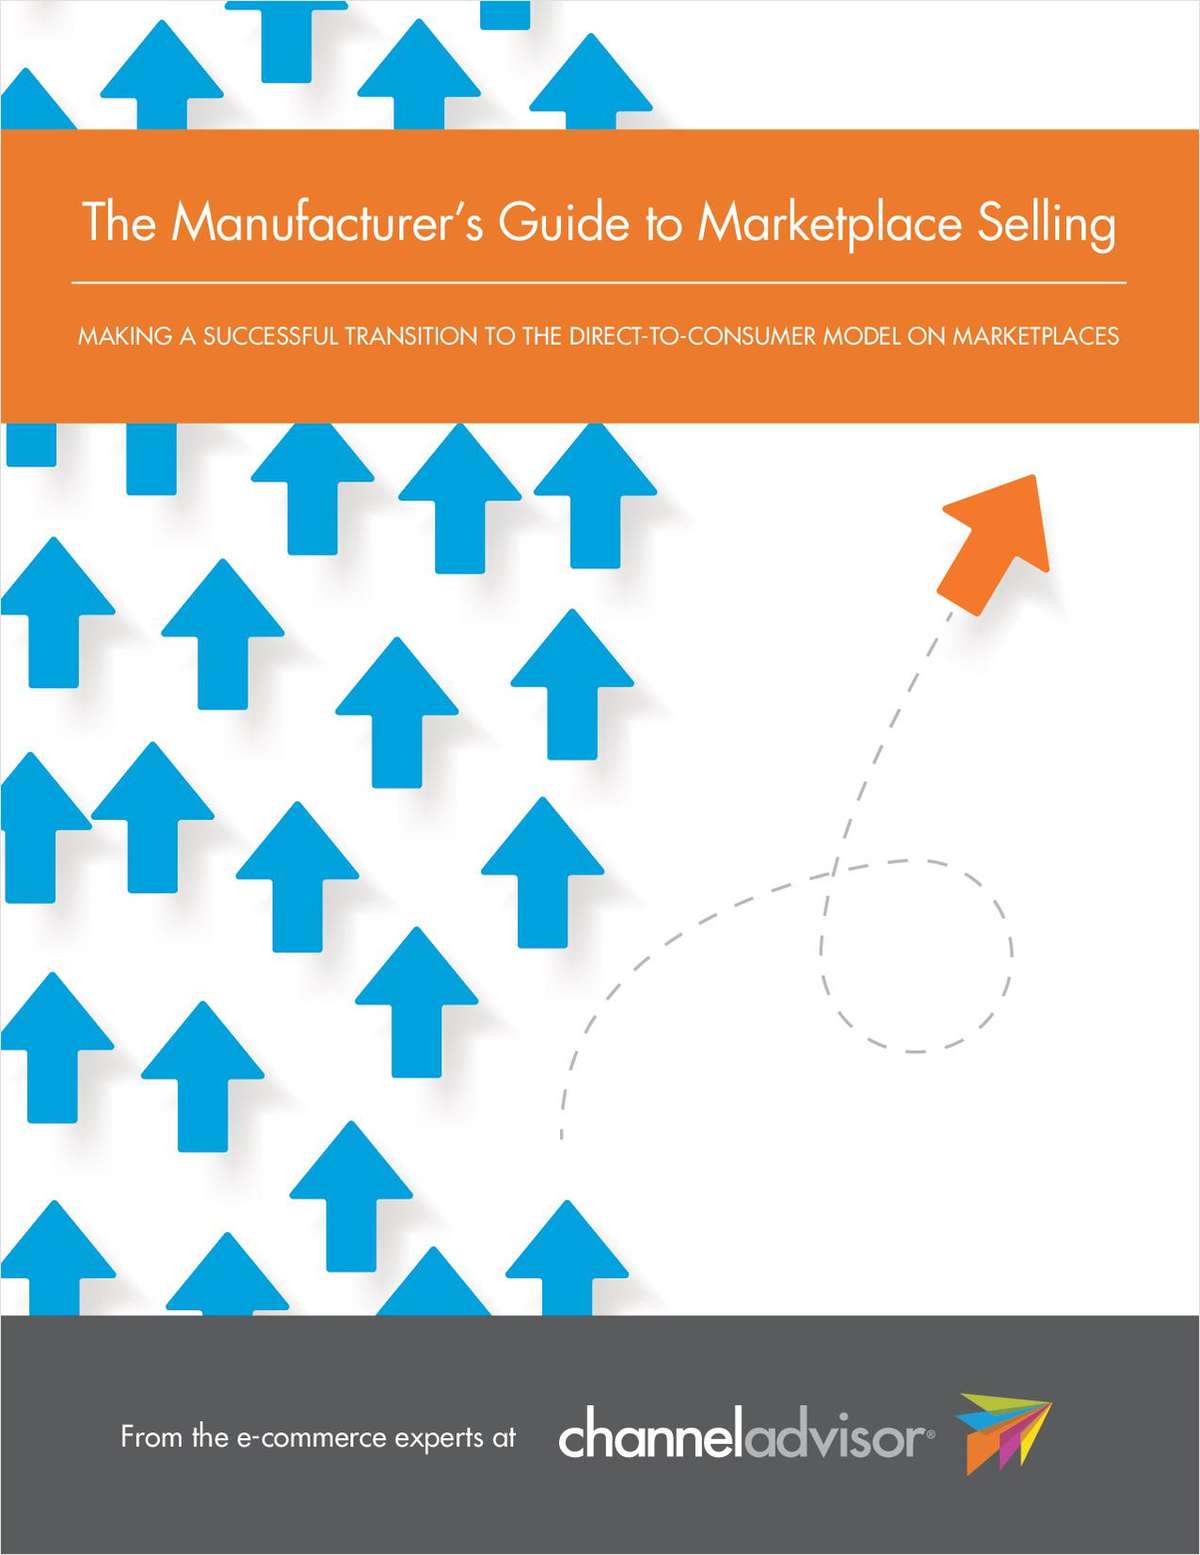 The Manufacturer's Guide to Marketplace Selling